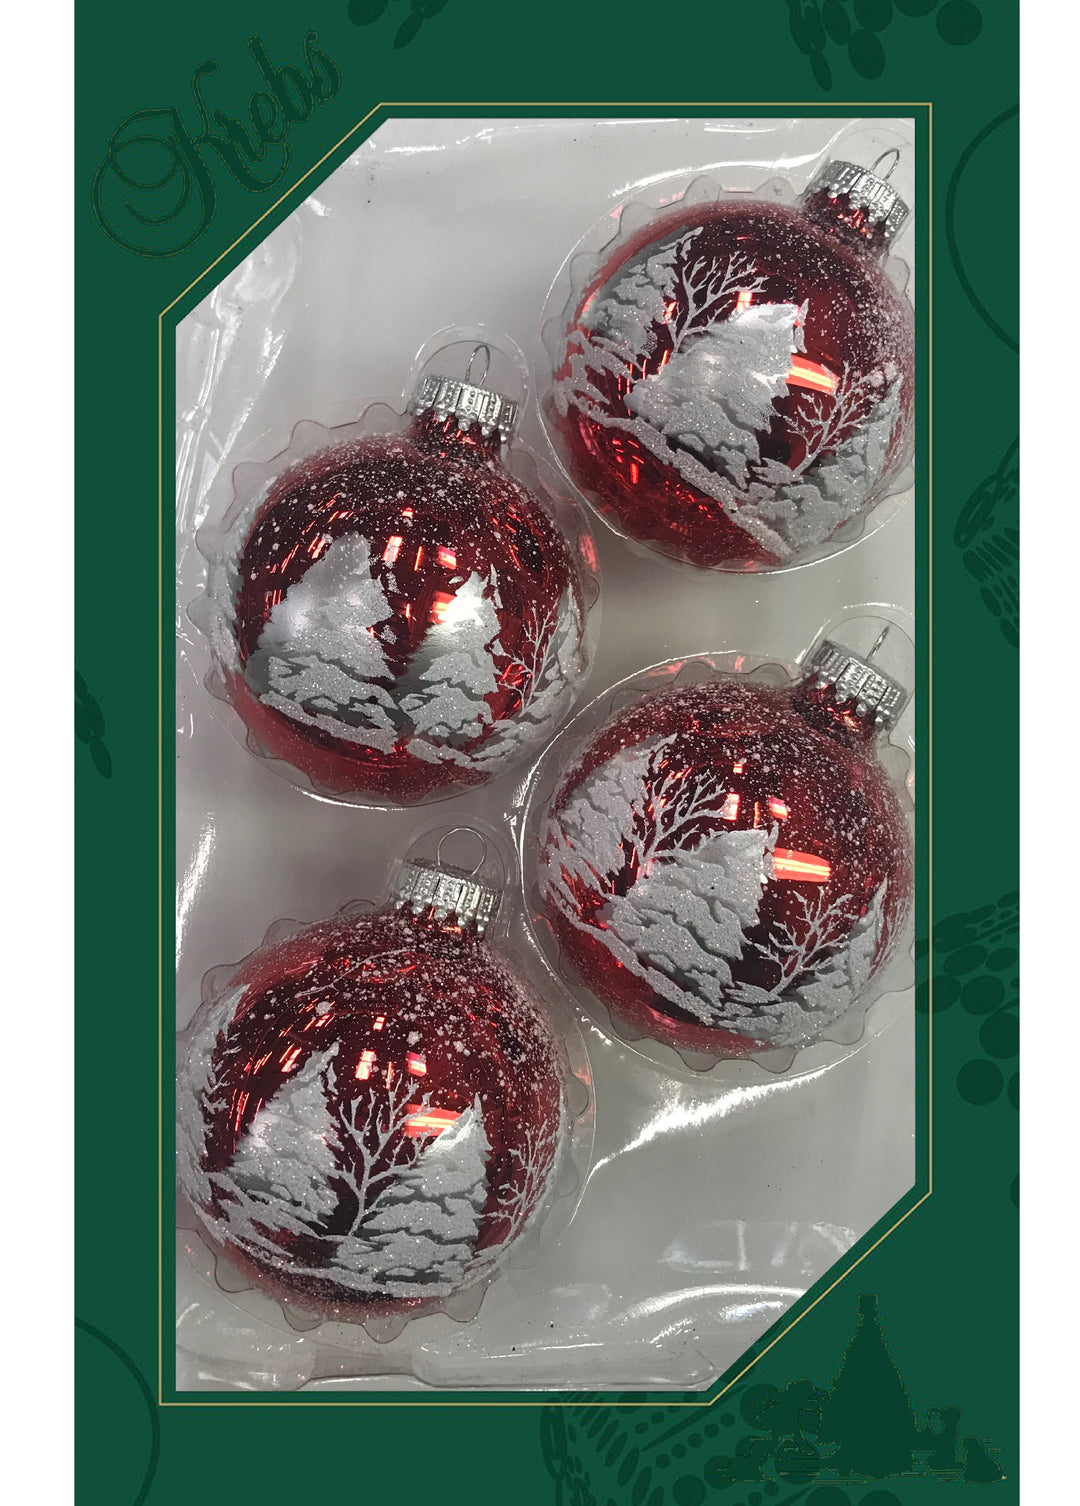 Glass Christmas Tree Ornaments - 67mm/2.63" [4 Pieces] Decorated Balls from Christmas by Krebs Seamless Hanging Holiday Decor (Christmas Red with White & Silver Festive Trees)